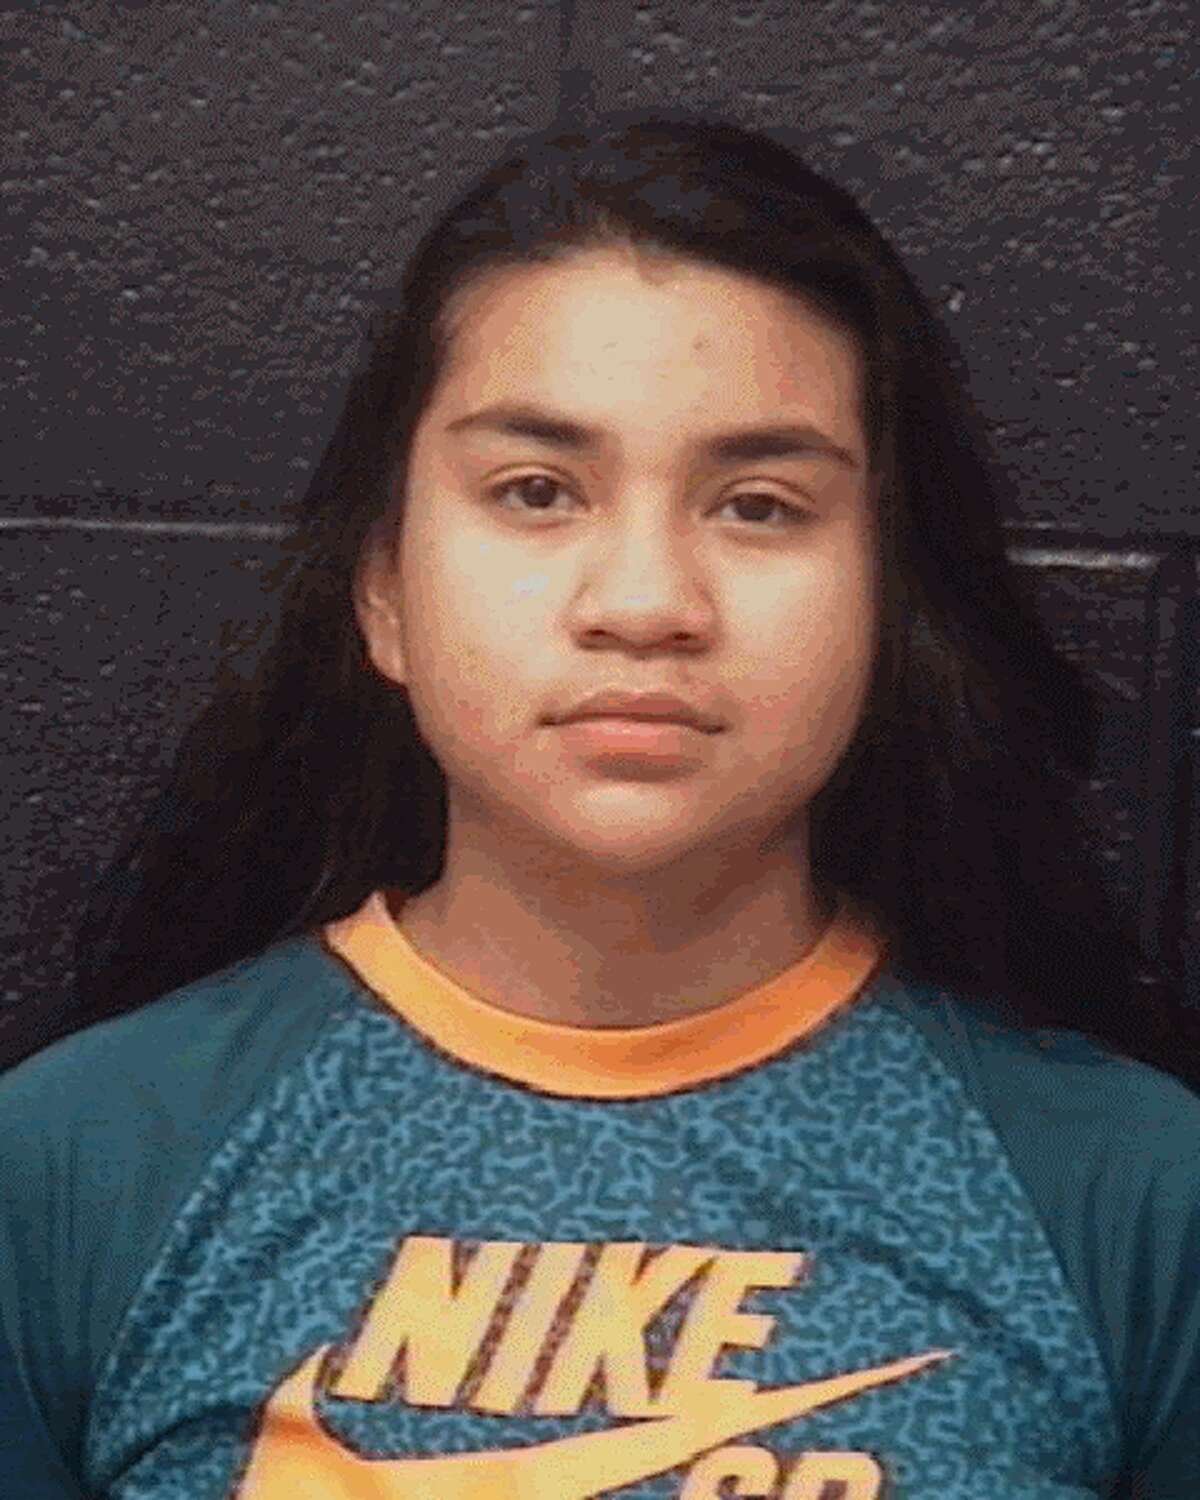 RAMOS, DENISE (W F) (22) years of age was arrested on the charge of POSS MARIJ